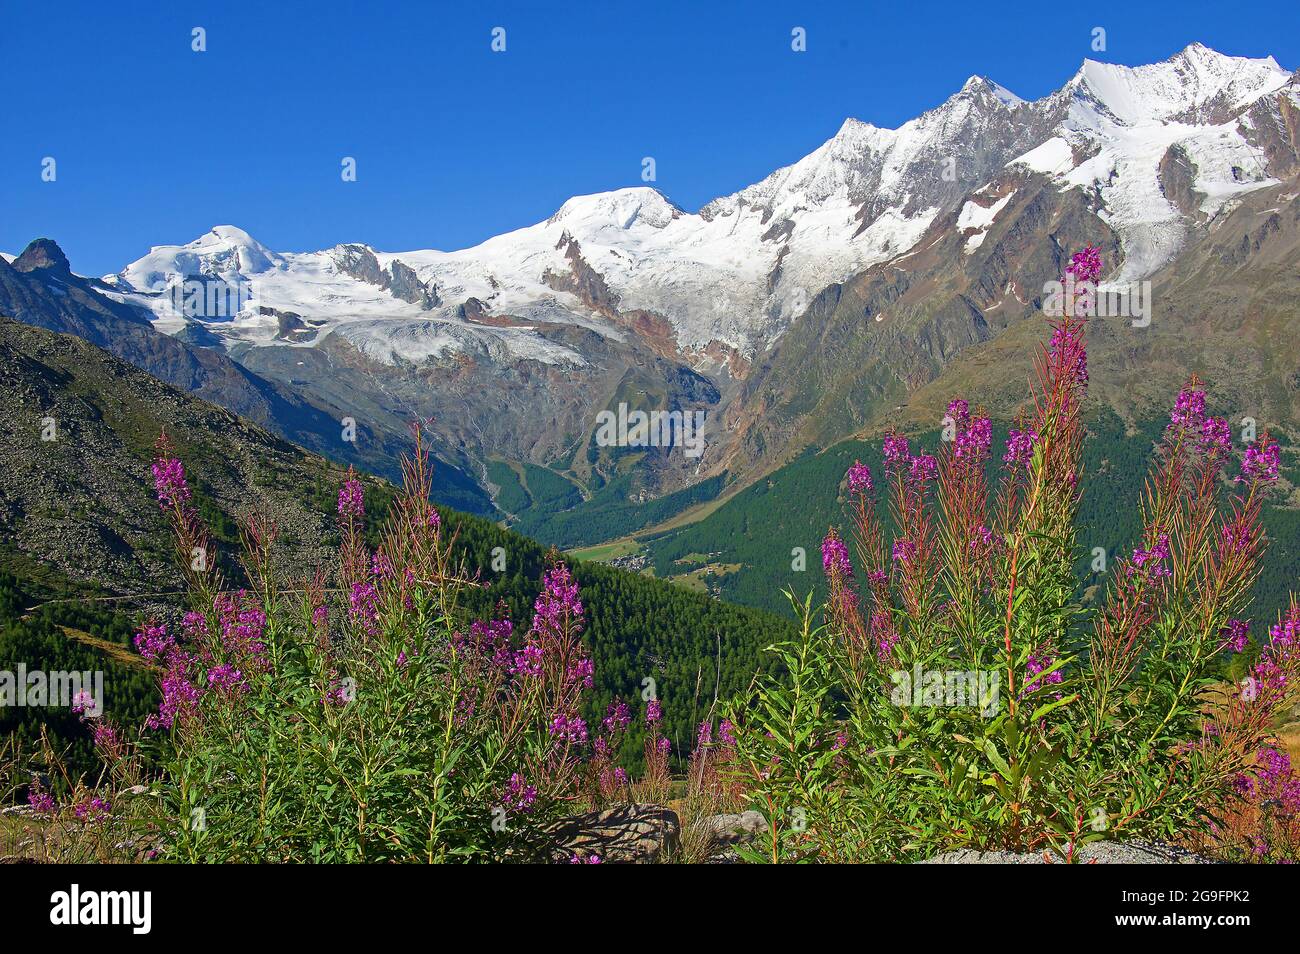 Seven four-thousand-meter peaks in Valais in the Saas Valley, Switzerland. From left: Allalin 4027 m, Alphubel 4206 m, Taeschhorn 4490 m, Dom 4545 m, Lenzspitze 4294 m, Nadelhorn 4327 m, Stecknadelhorn 4241 m, seen from Kreuzboden / Saasgrund Stock Photo